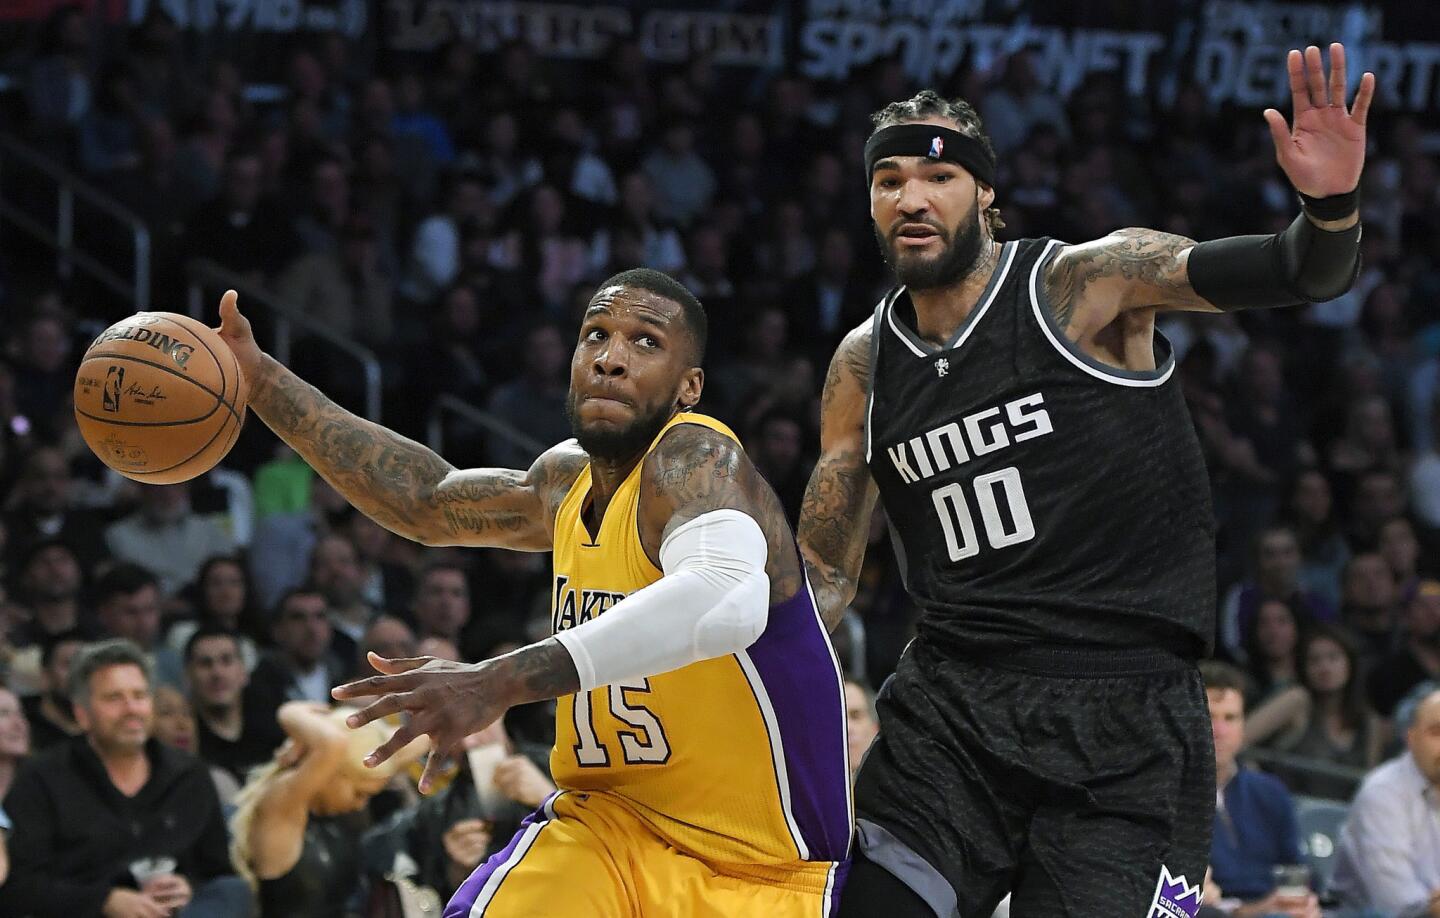 Lakers forward Thomas Robinson drives toward the basket against Kings center Willie Cauley-Stein during the first half.